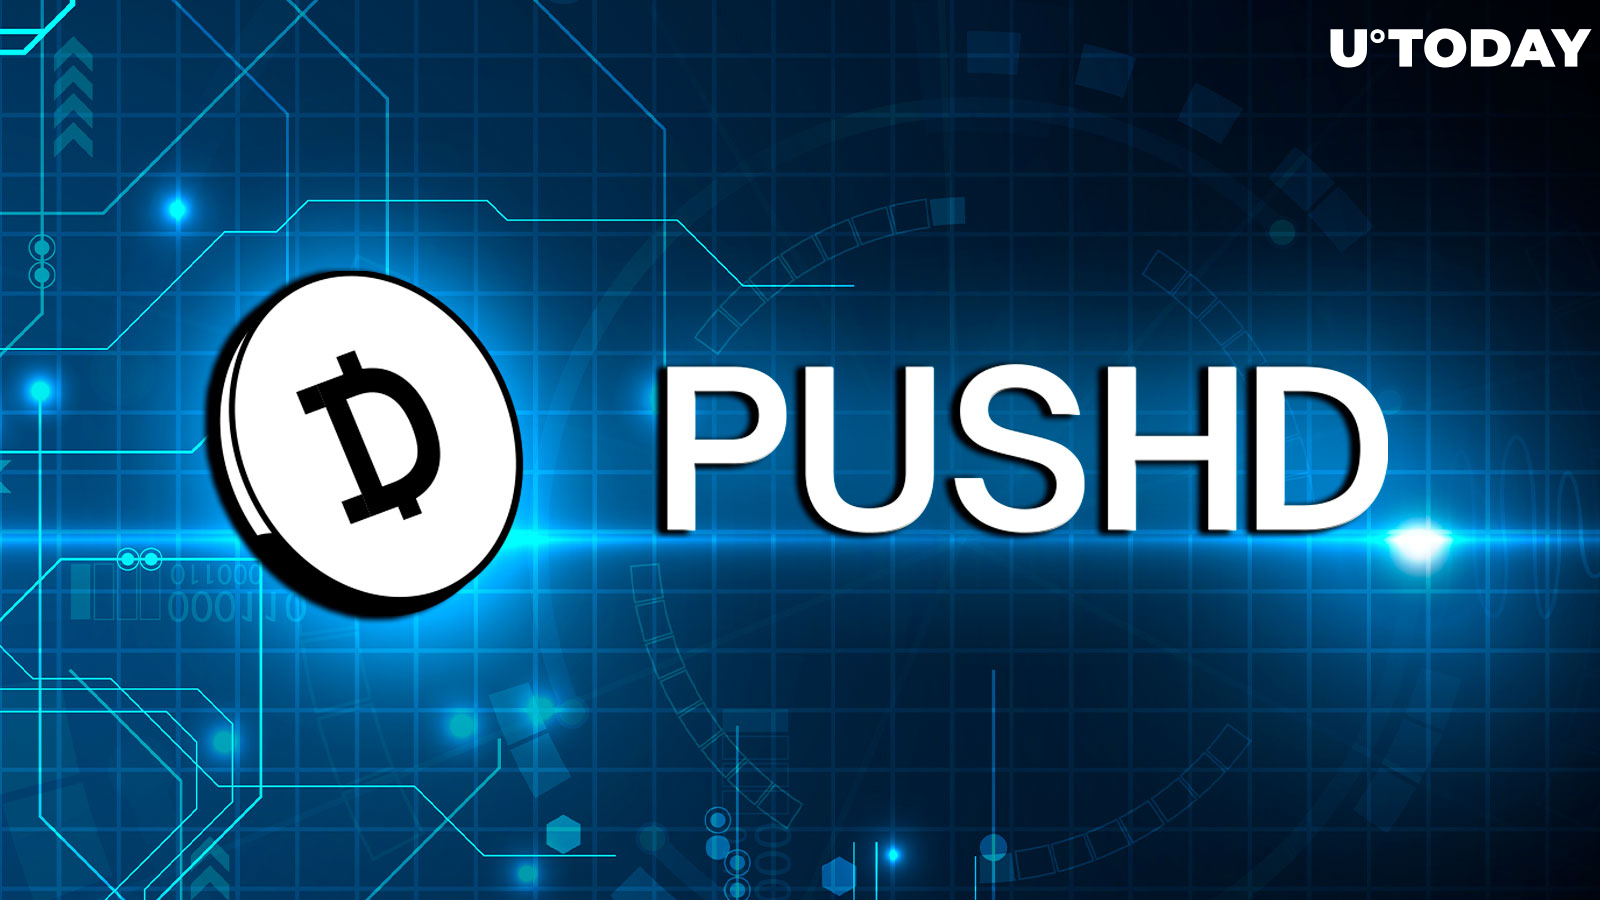 Pushd (PUSHD) Pre-Sale Gains Steam in Late January on Altcoin Scene as Ethereum (ETH), Polygon (MATIC) Surge Above Crucial Levels